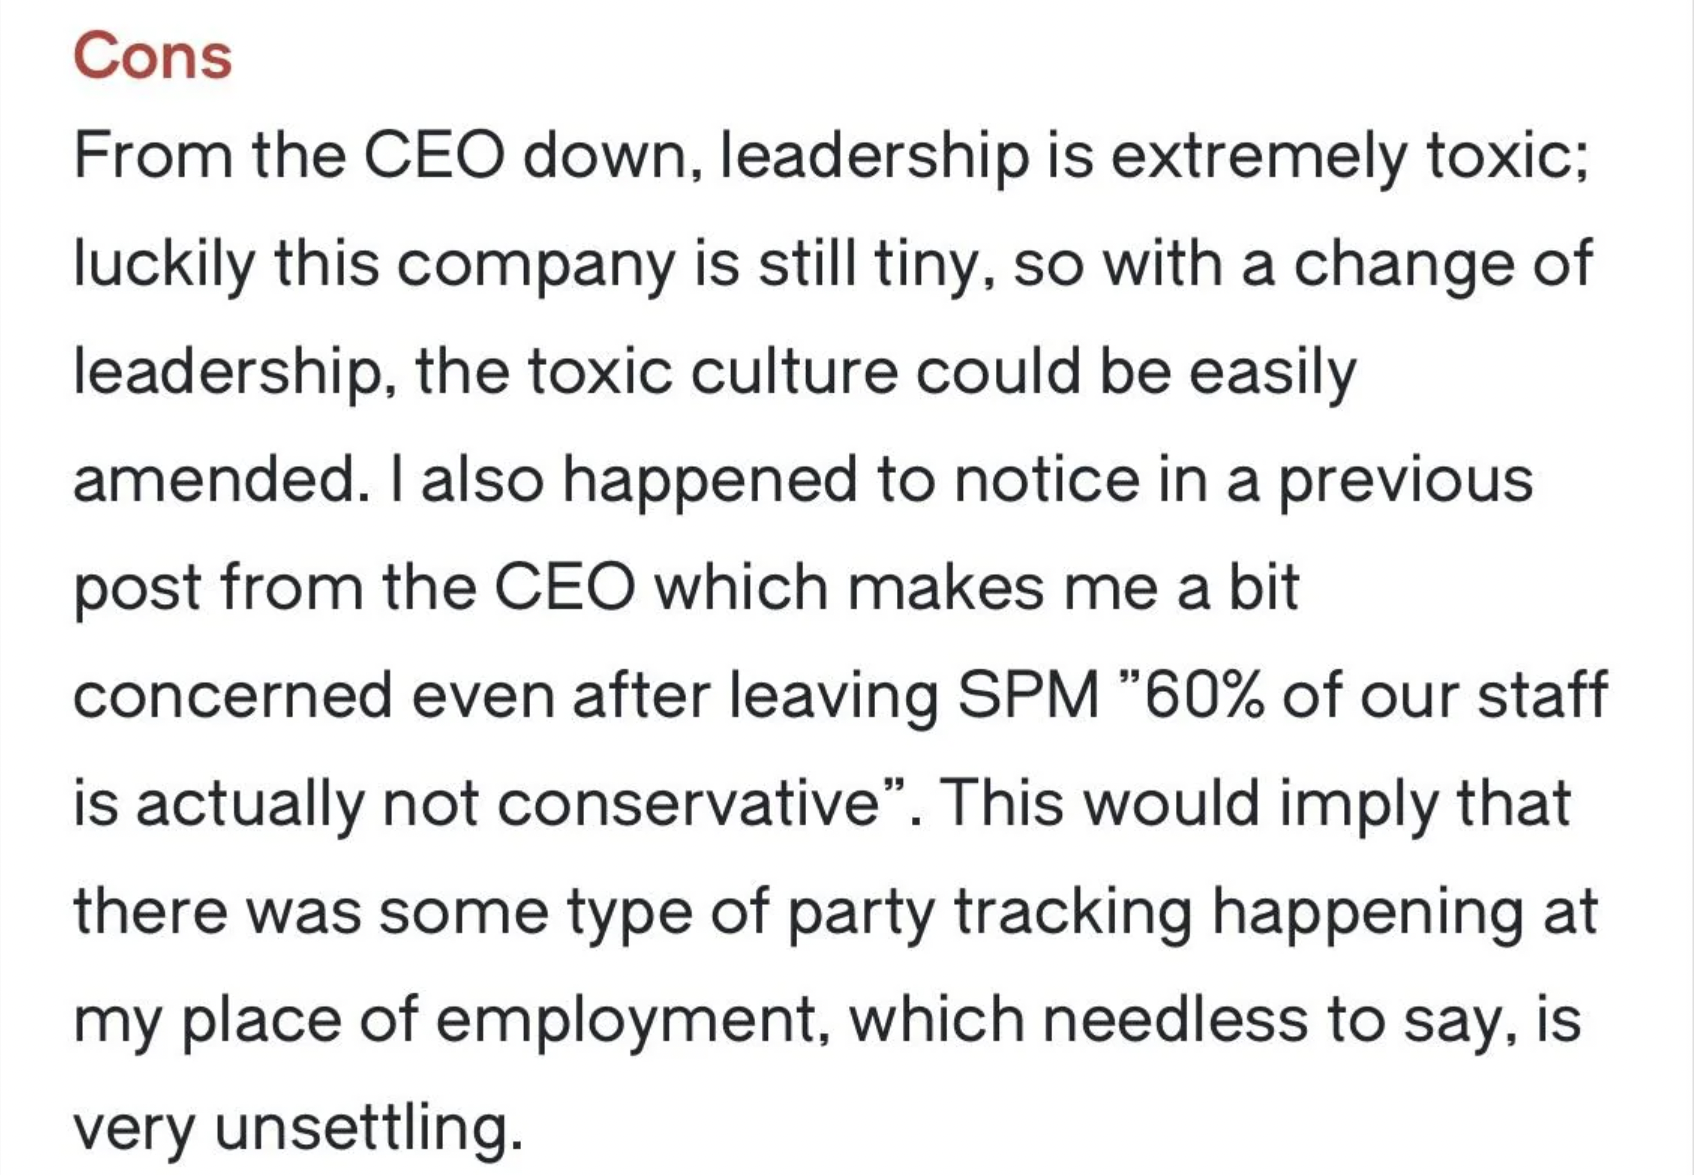 bully apologizes - Cons From the Ceo down, leadership is extremely toxic; luckily this company is still tiny, so with a change of leadership, the toxic culture could be easily amended. I also happened to notice in a previous post from the Ceo which makes 